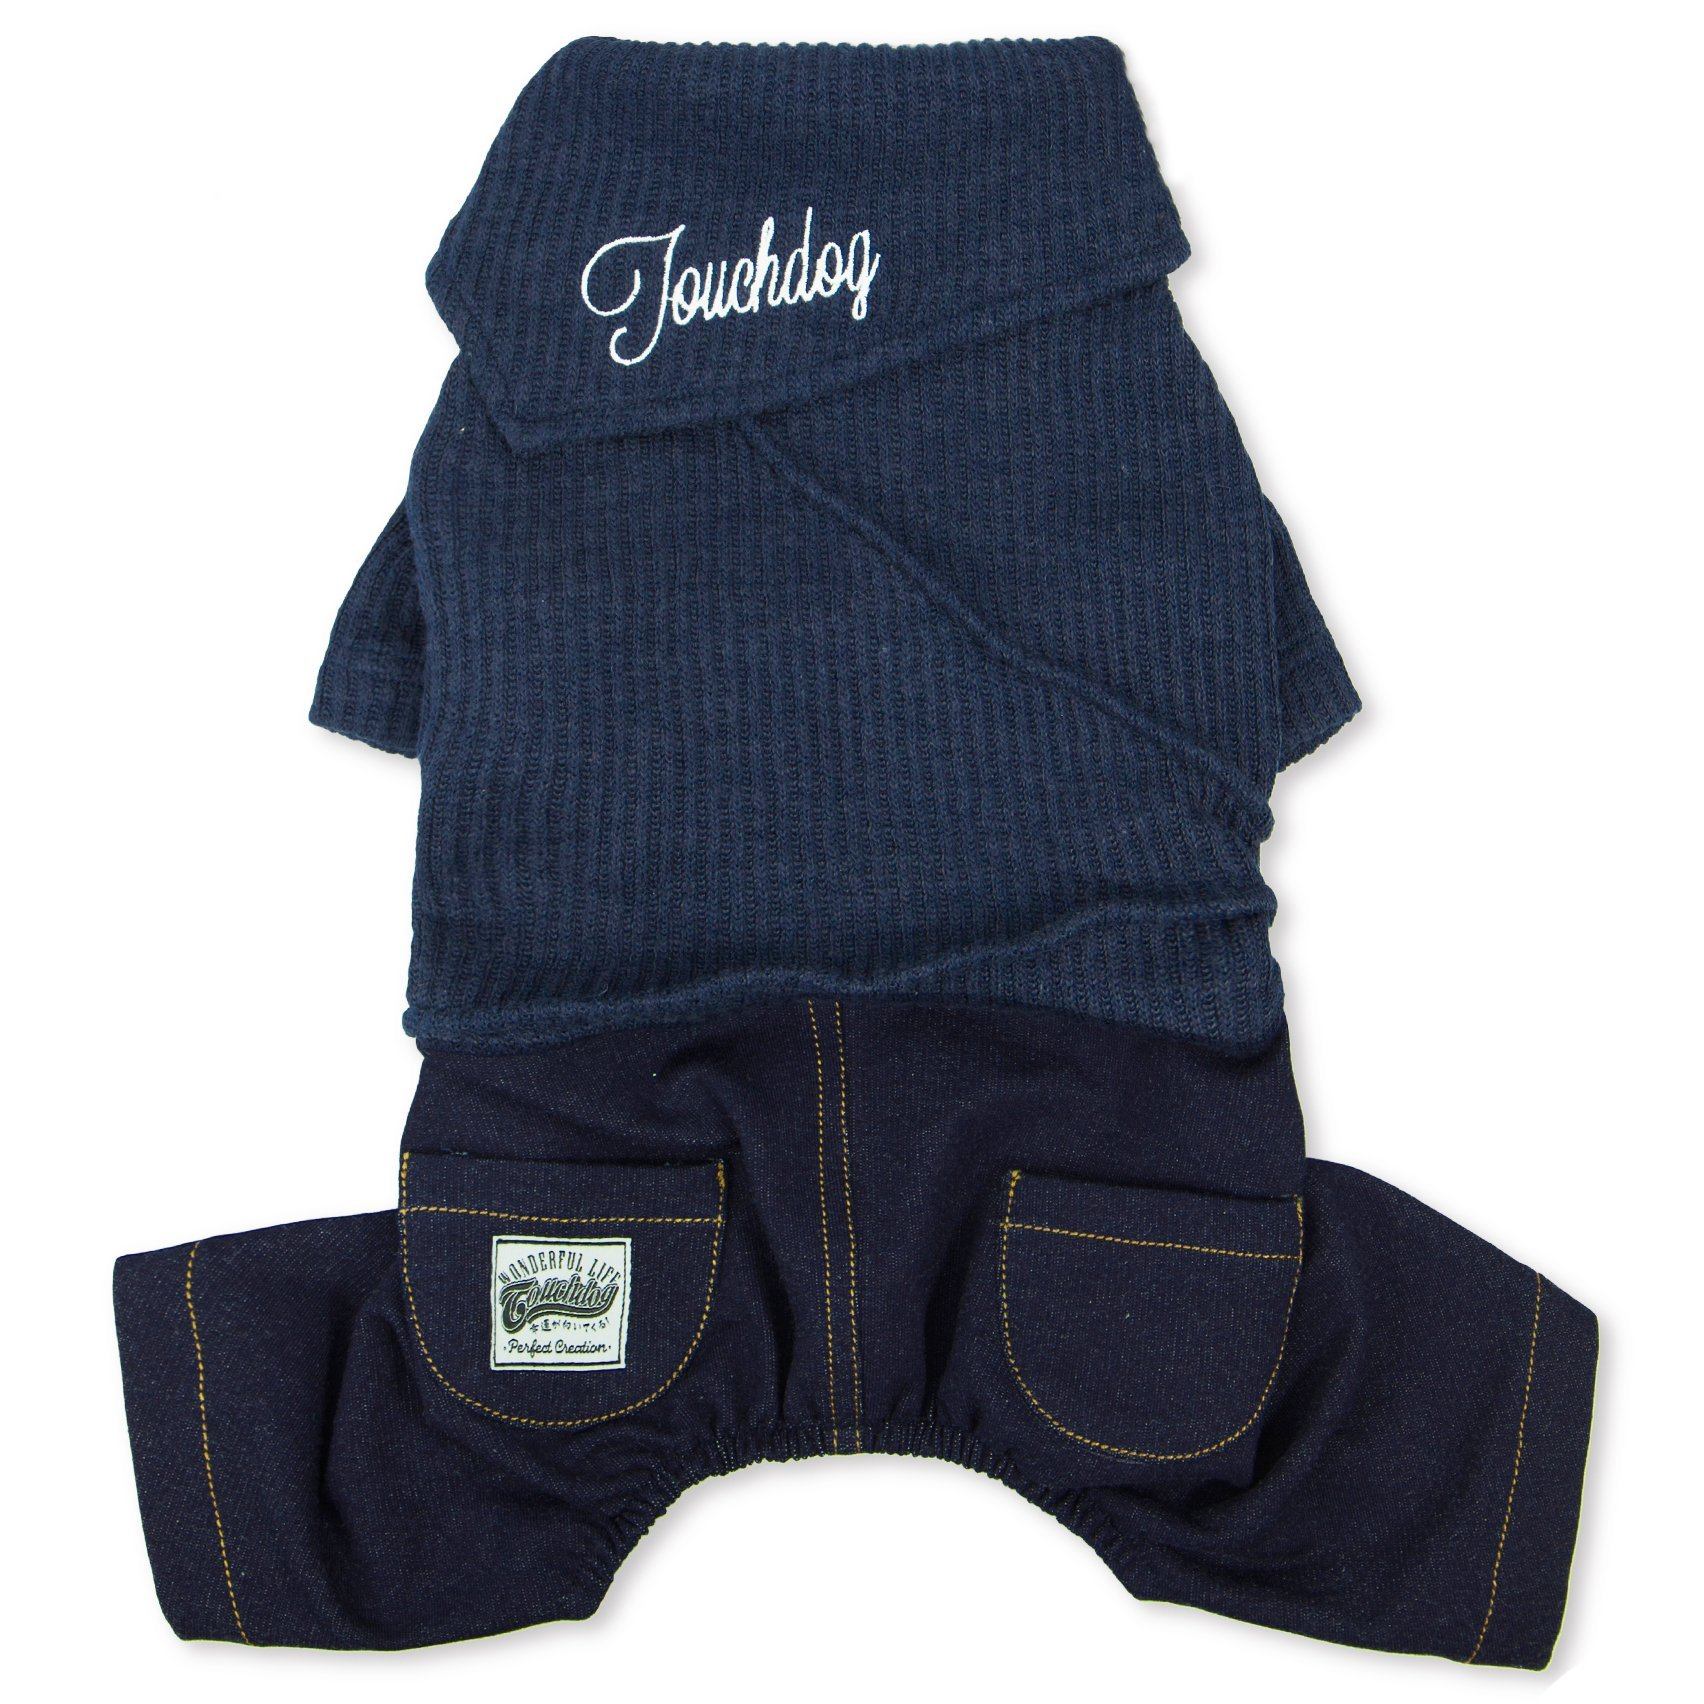 Touchdog Vogue Neck-Wrap Full Body Fashion Dog Sweater Outfit X-Small Navy